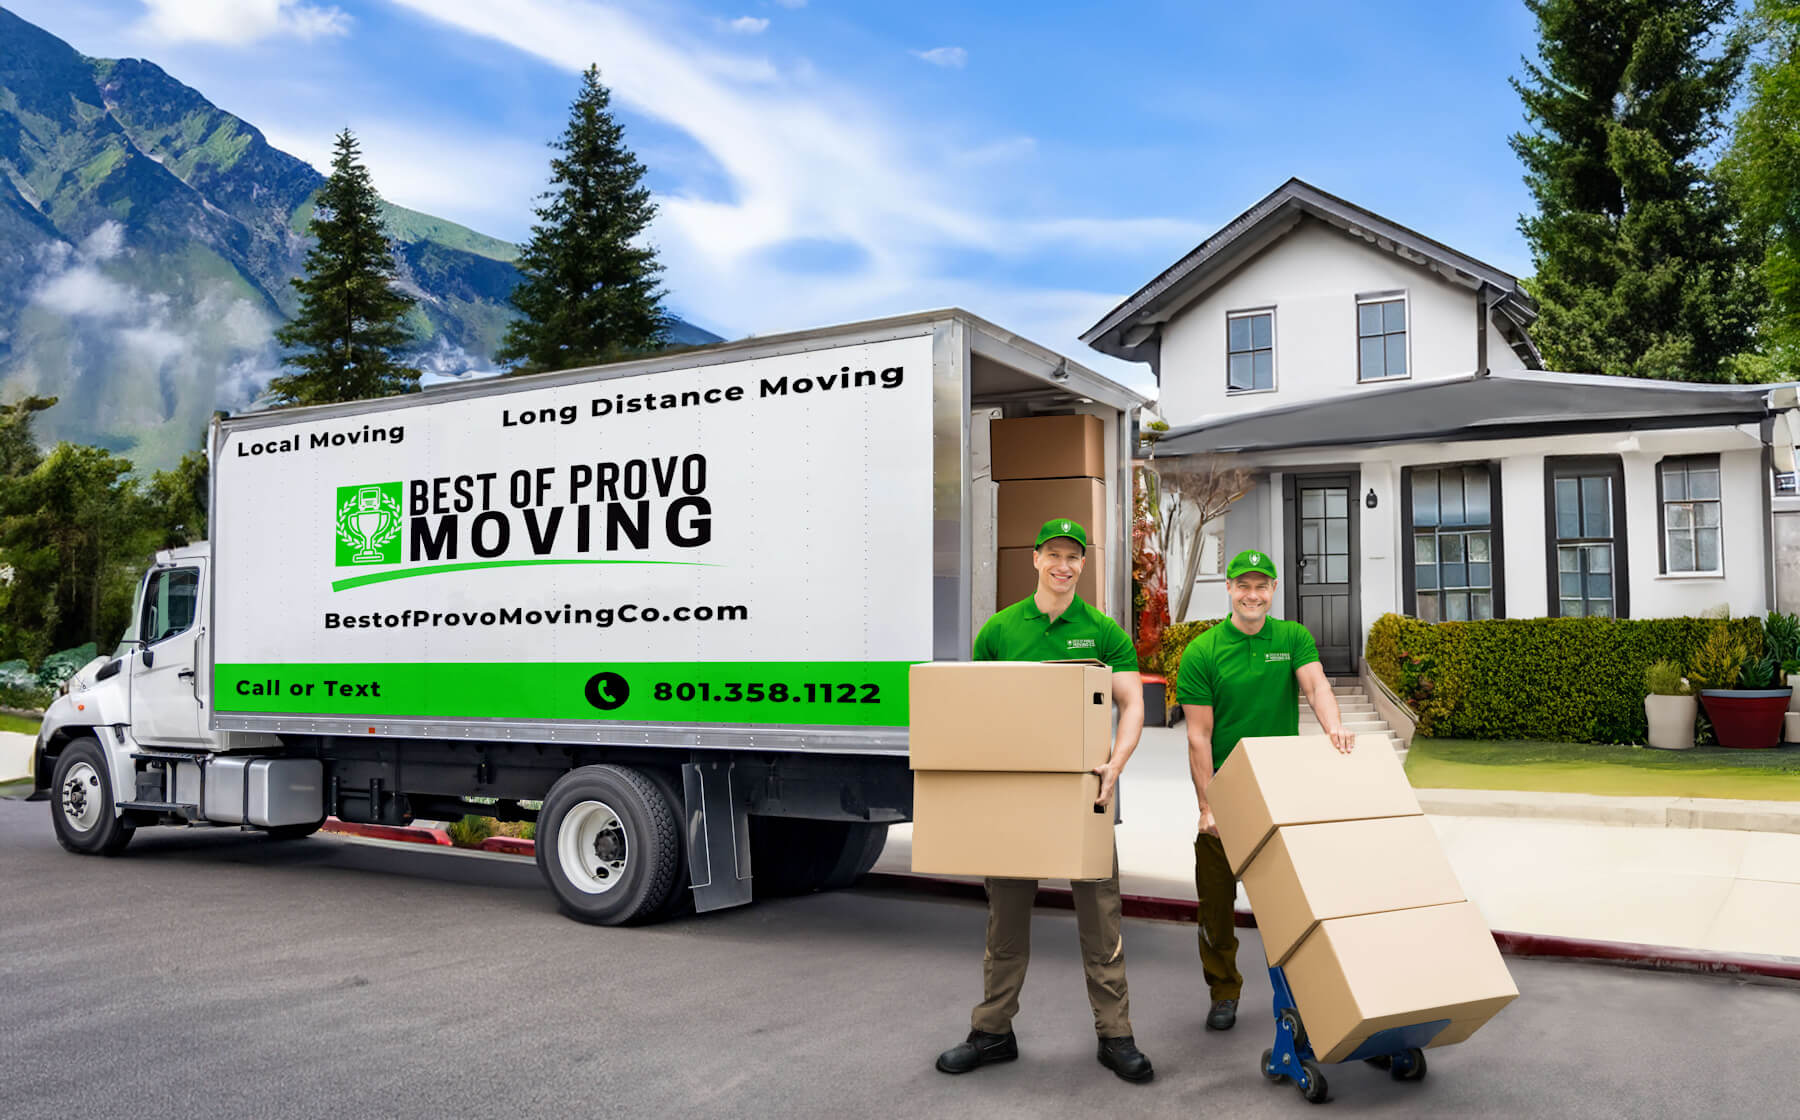 We Are a Provo, UT Moving Company